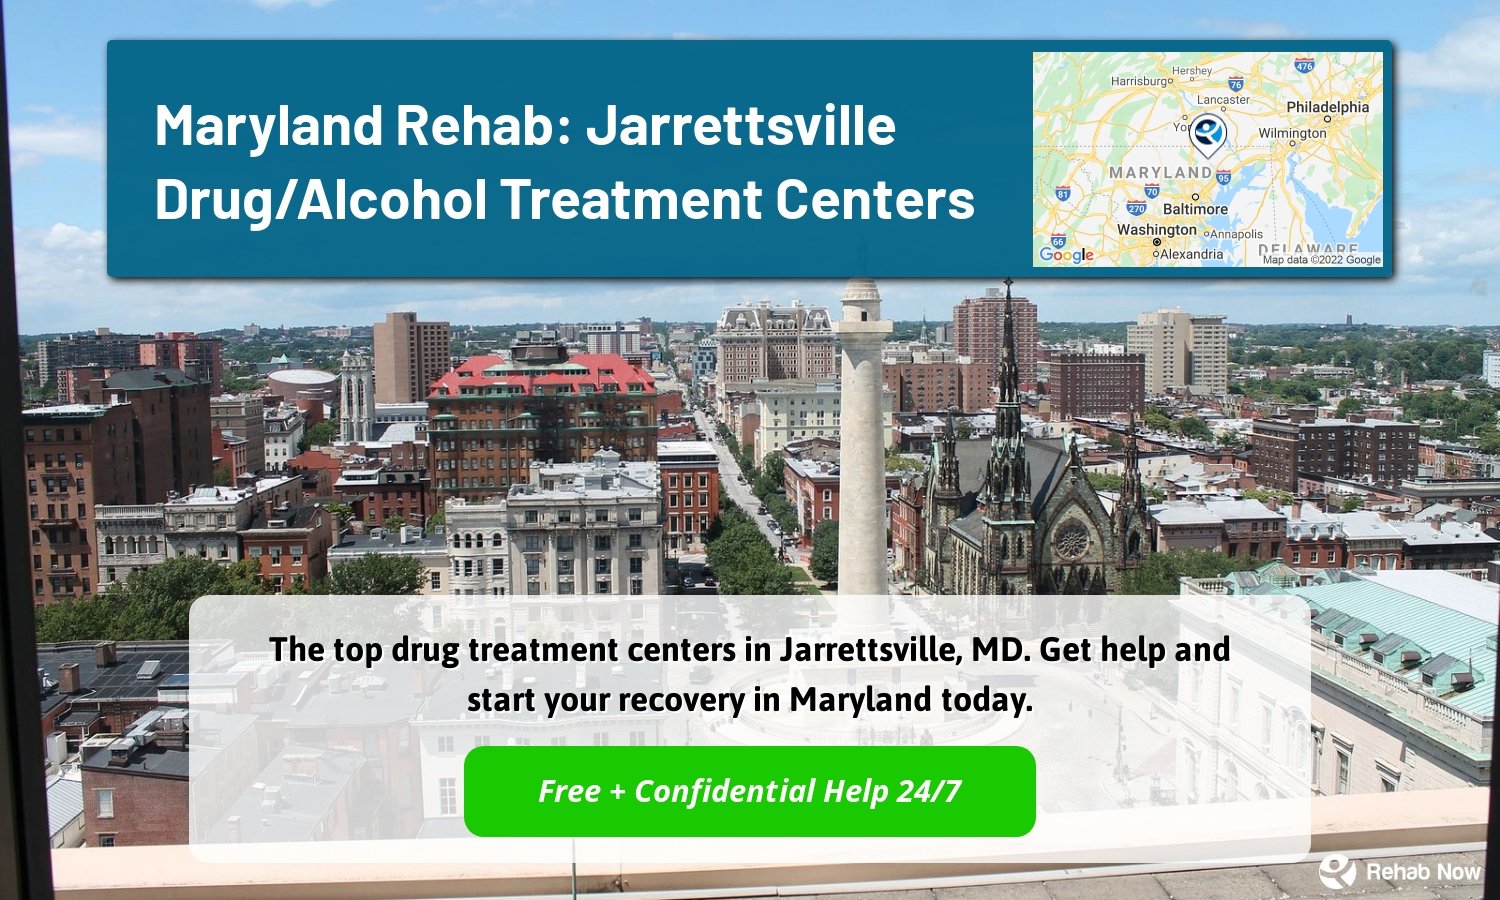 The top drug treatment centers in Jarrettsville, MD. Get help and start your recovery in Maryland today.